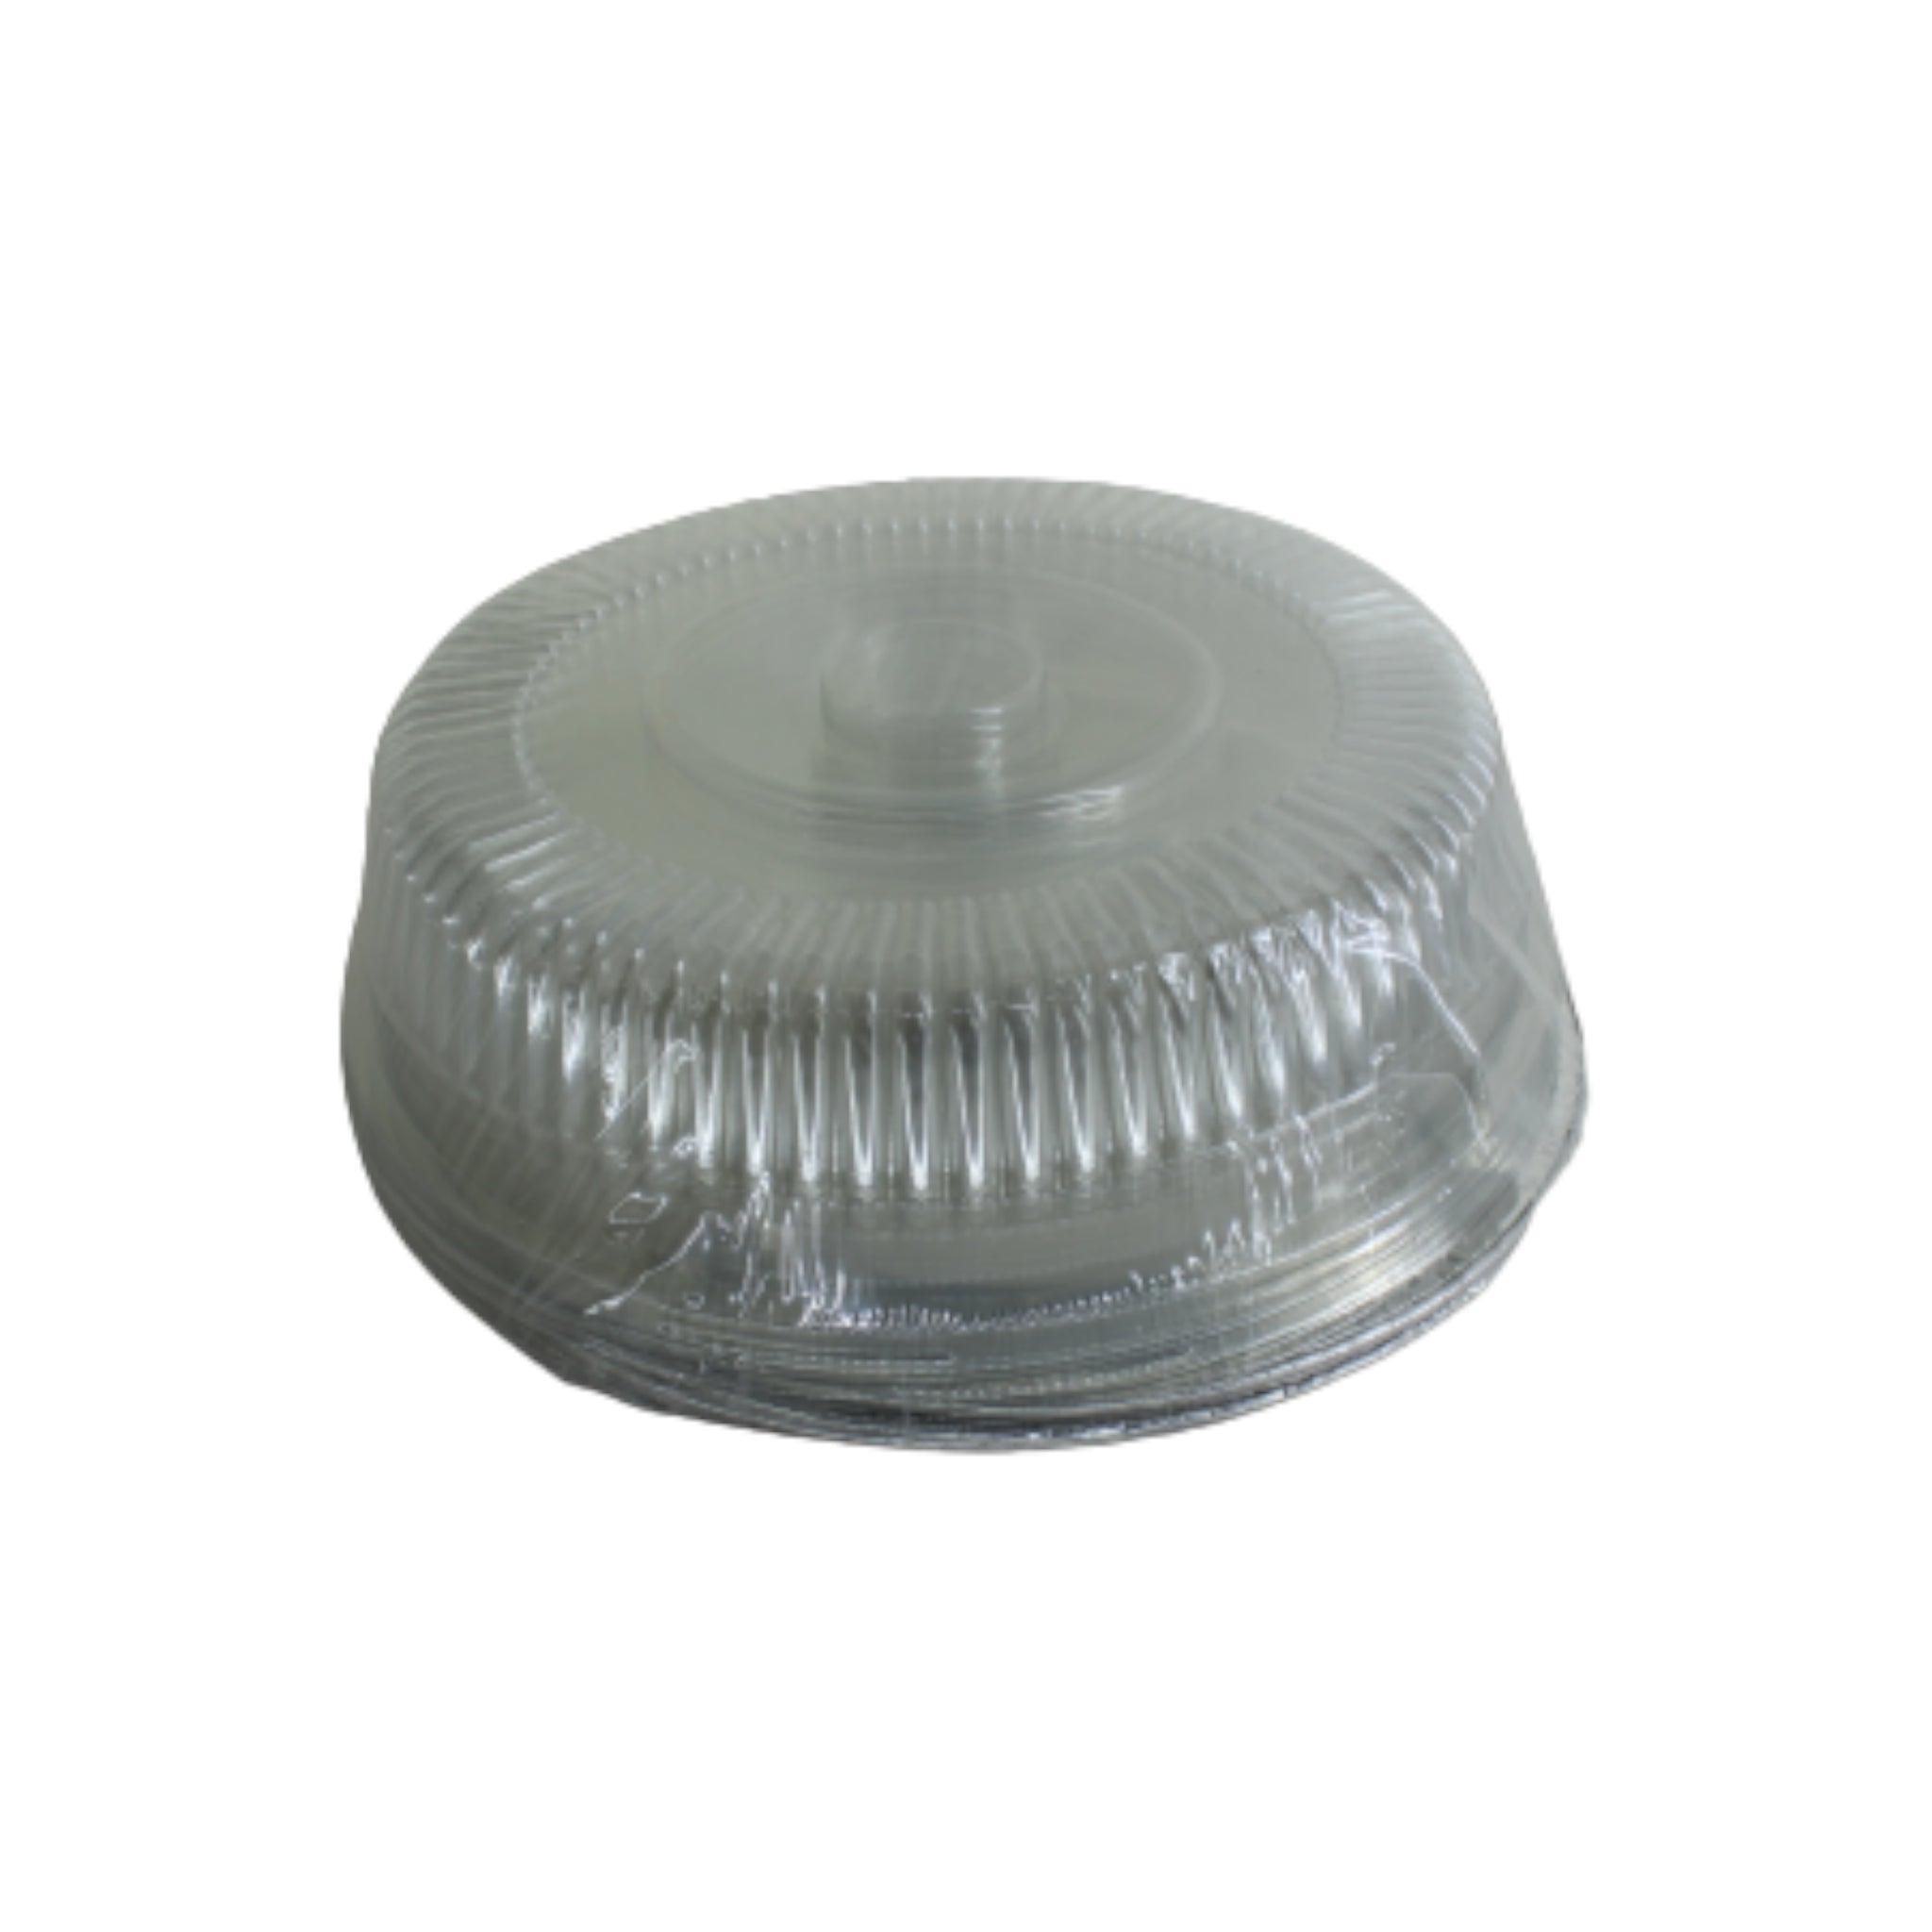 Aluminium Foil Round Serving Plate 6-Division with Dome Lid